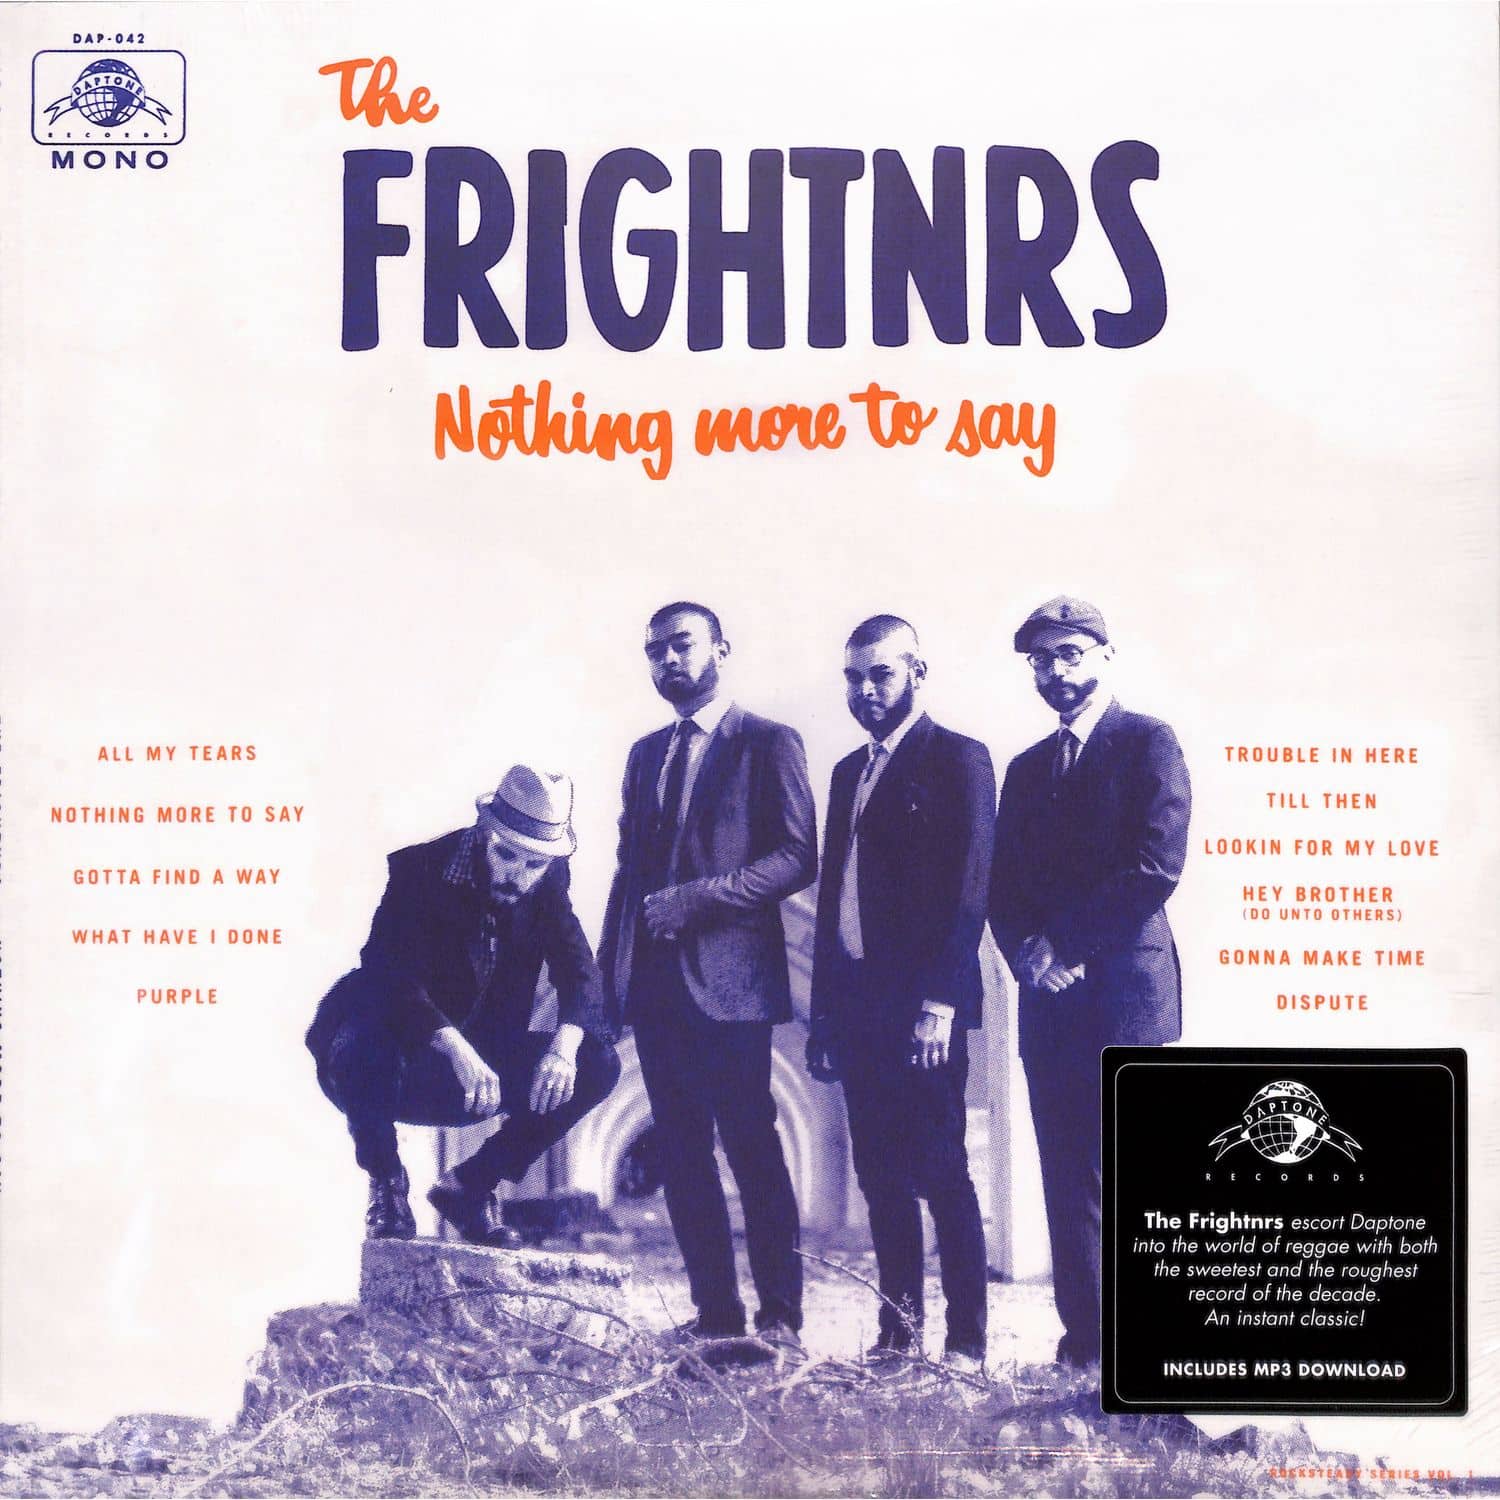 The Frightnrs - NOTHING MORE TO SAY 